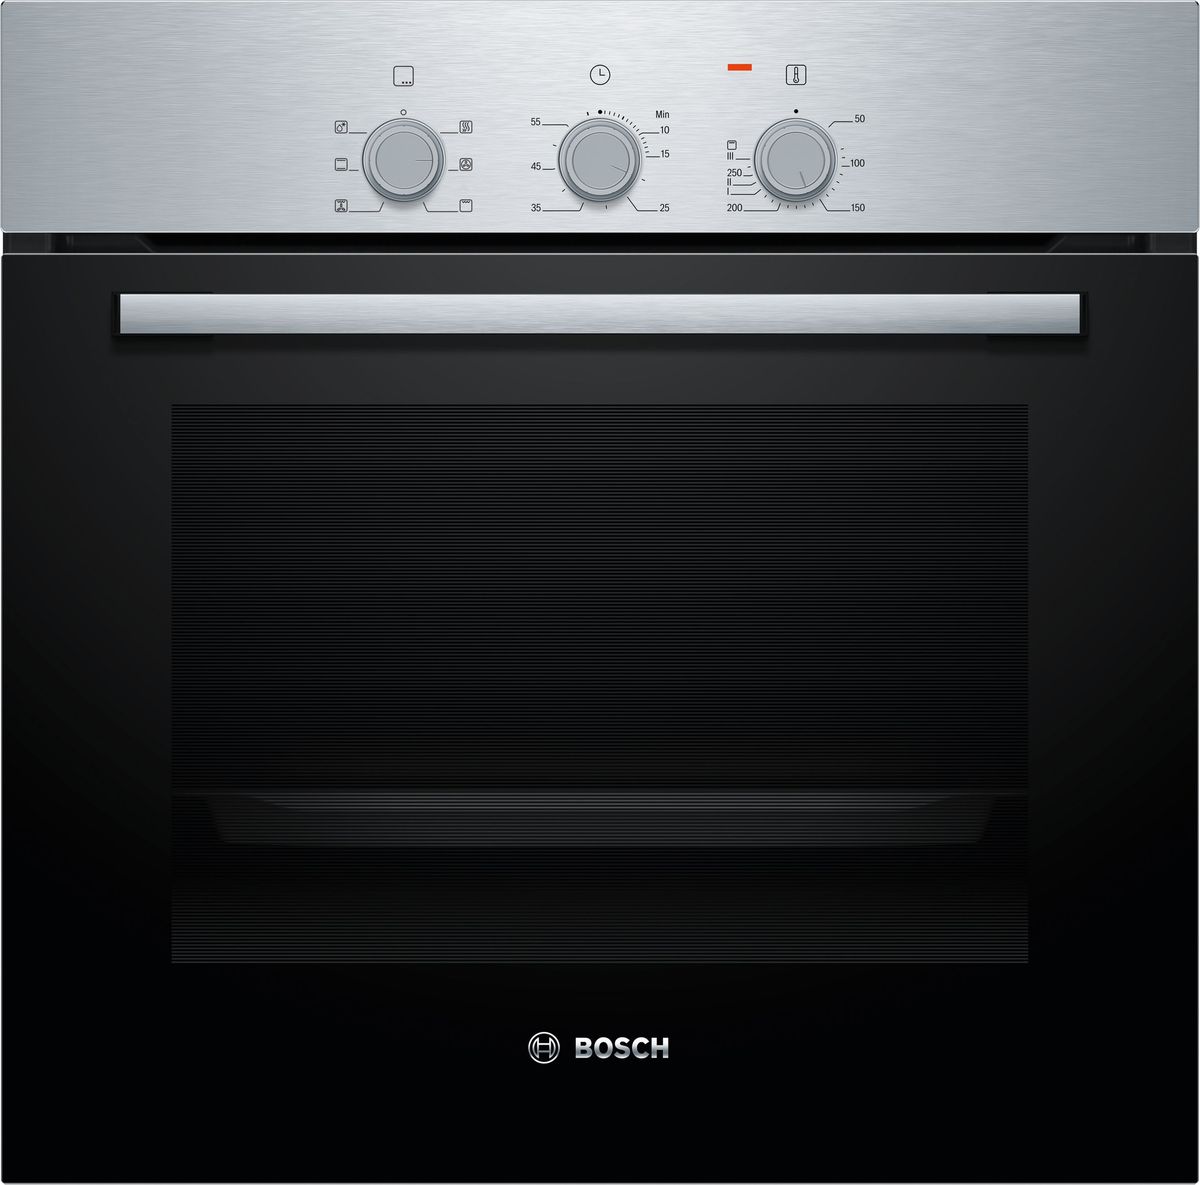 Bosch - Single Wall Oven - Serie 2 - Stainless steel